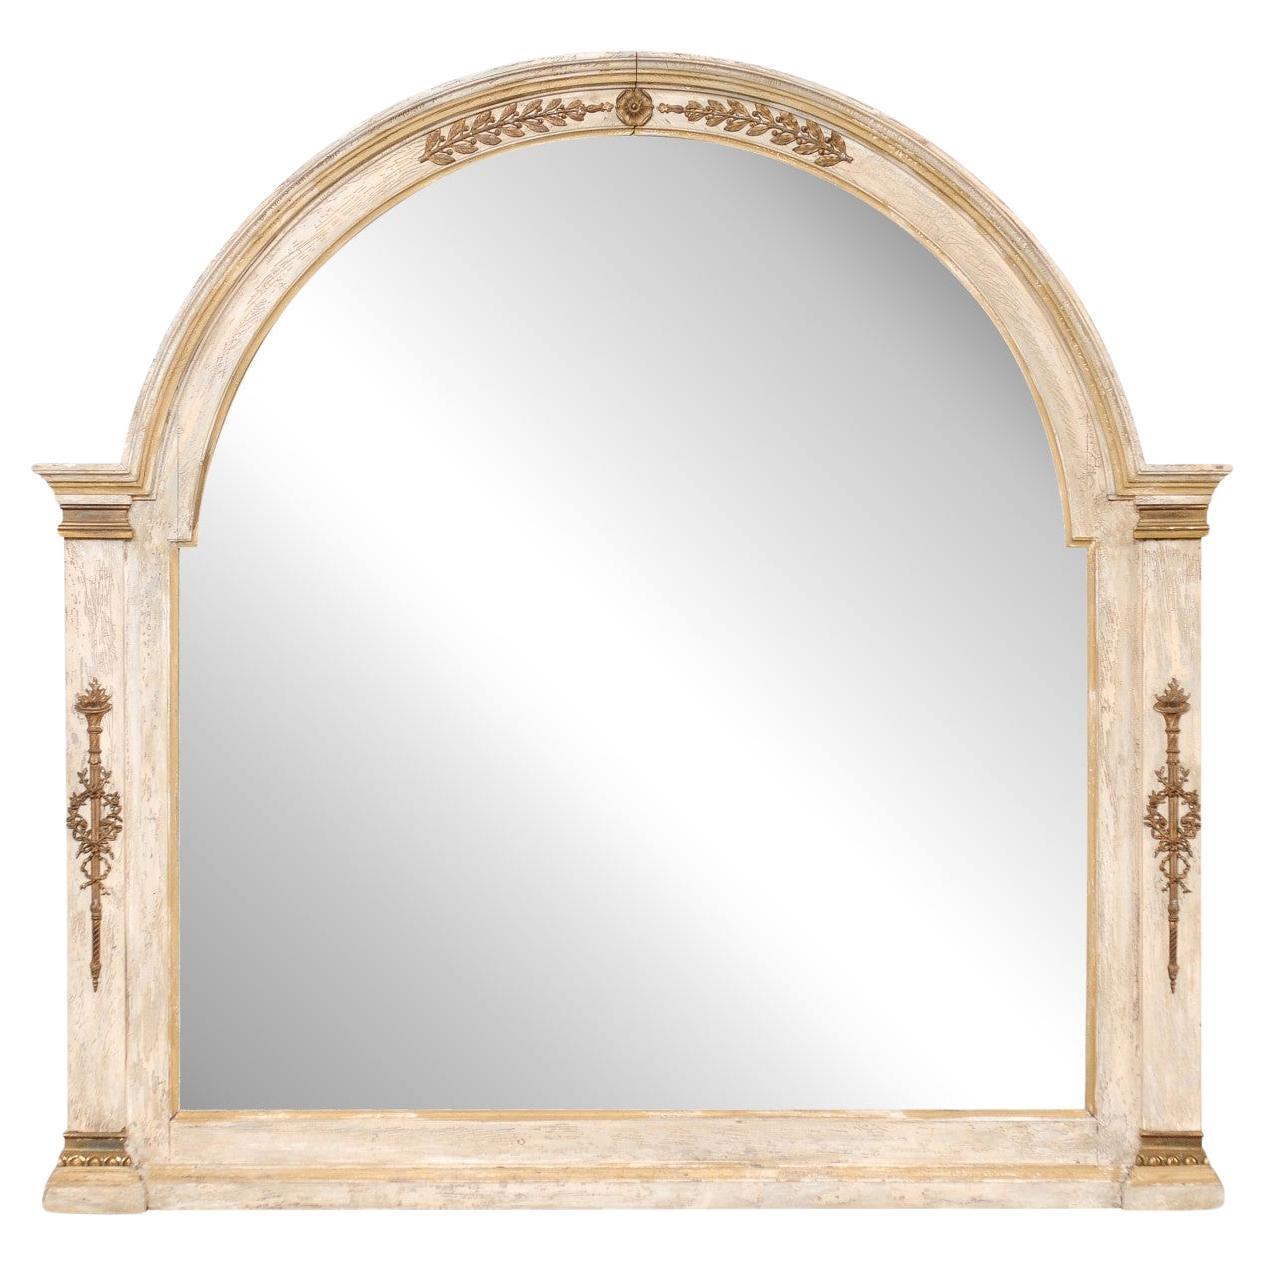 Early 20th C. French Painted Wood Mirror, Arched with Column Sides (3.5 Ft Tall) For Sale